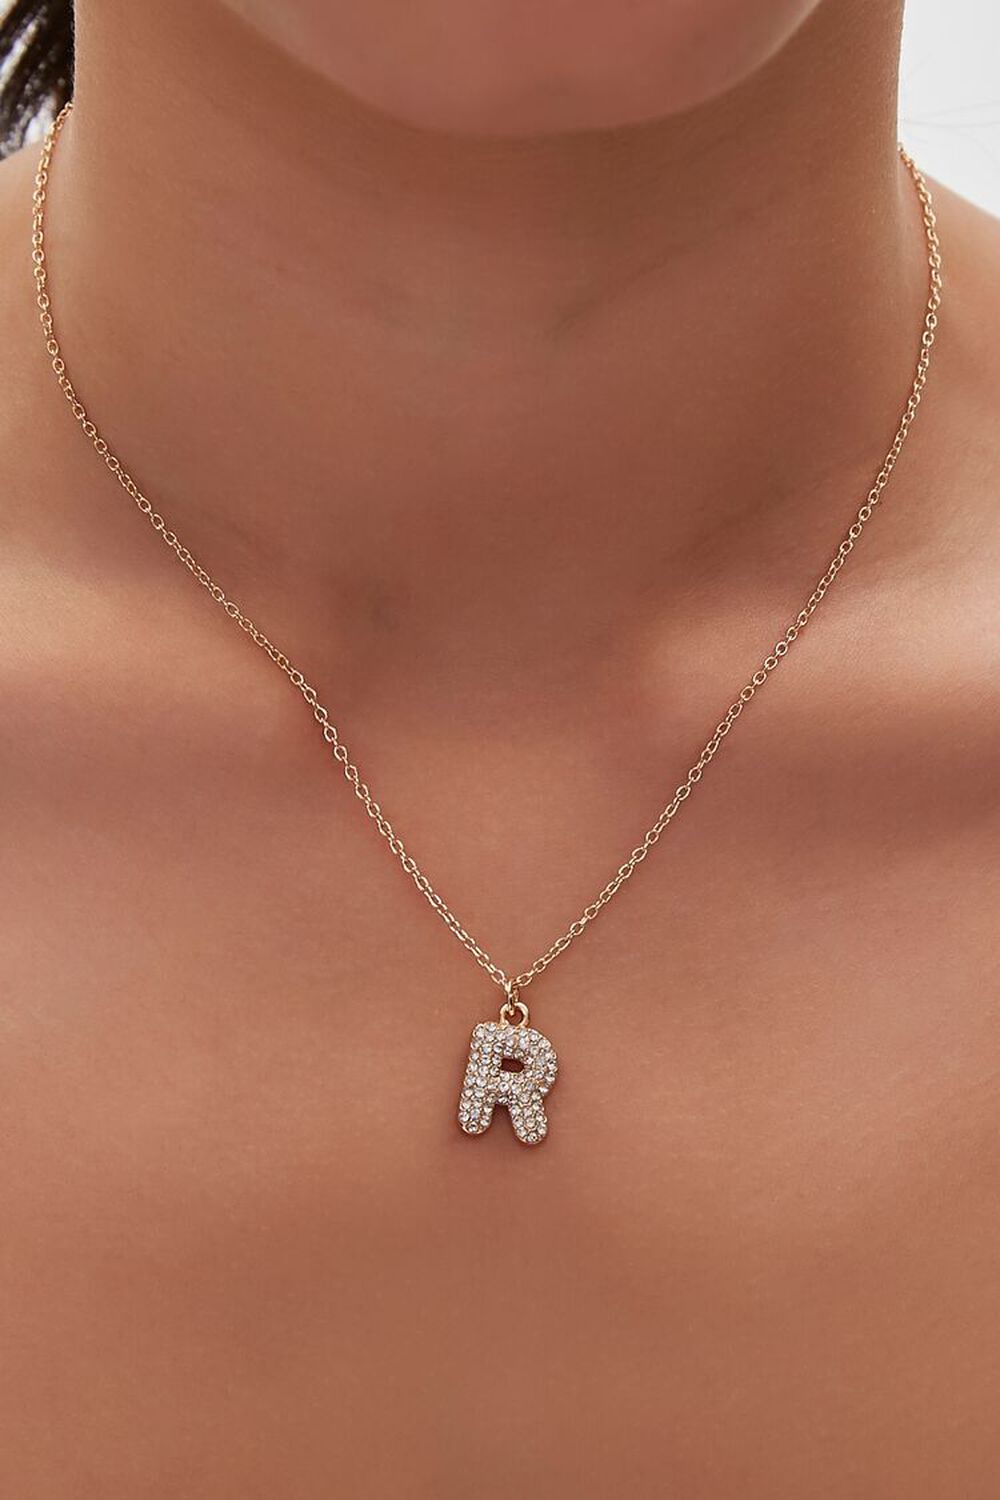 GOLD/R Rhinestone Initial Necklace, image 1